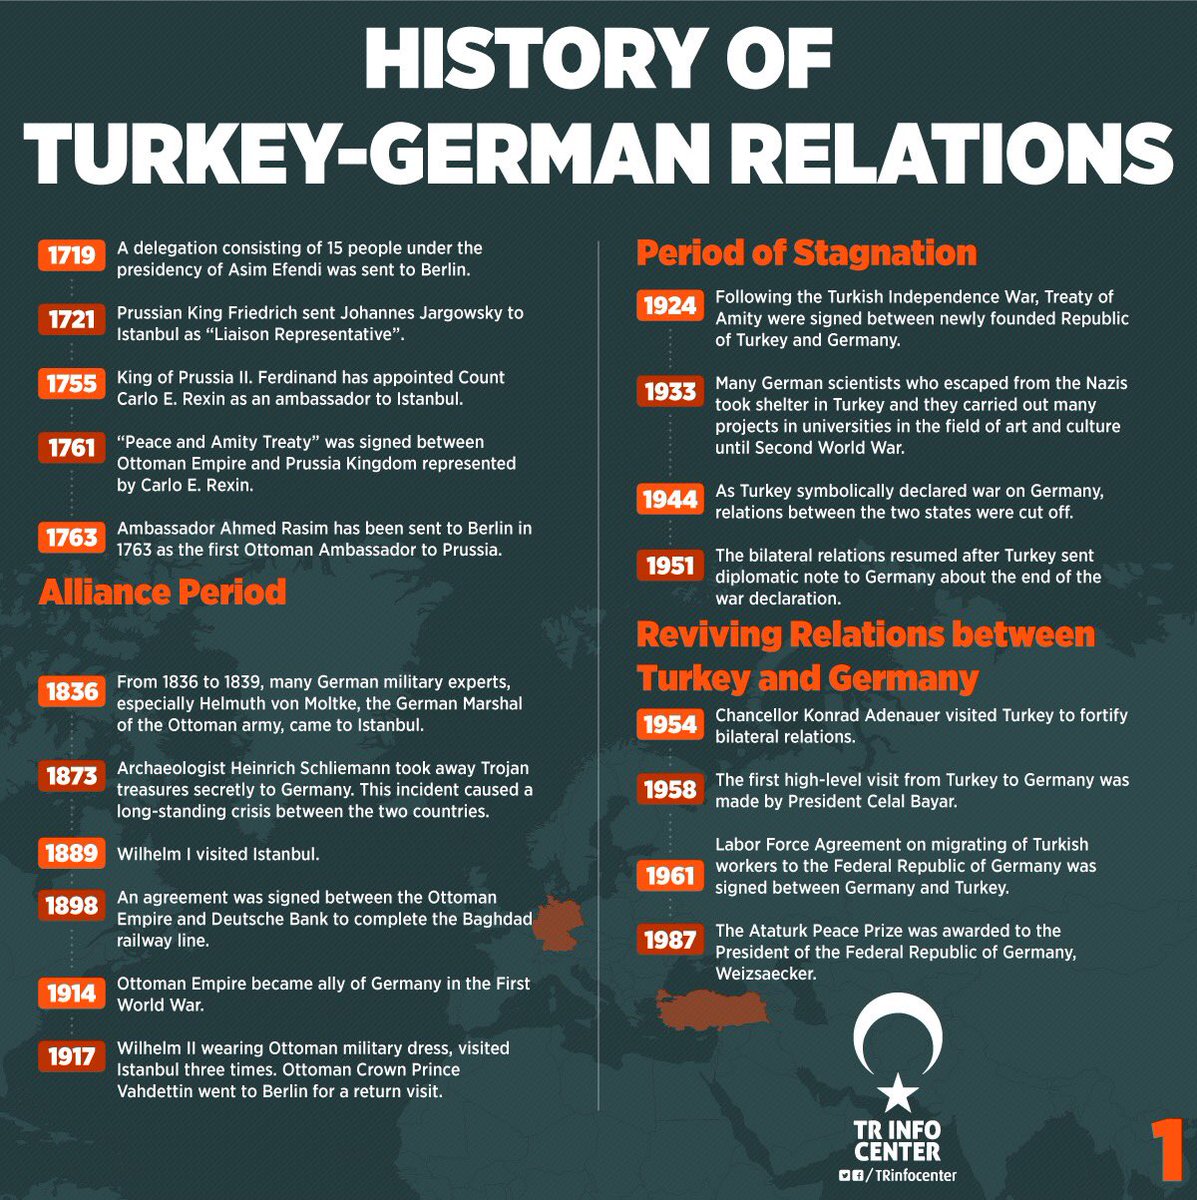 The History of Turkey - Germany Relations